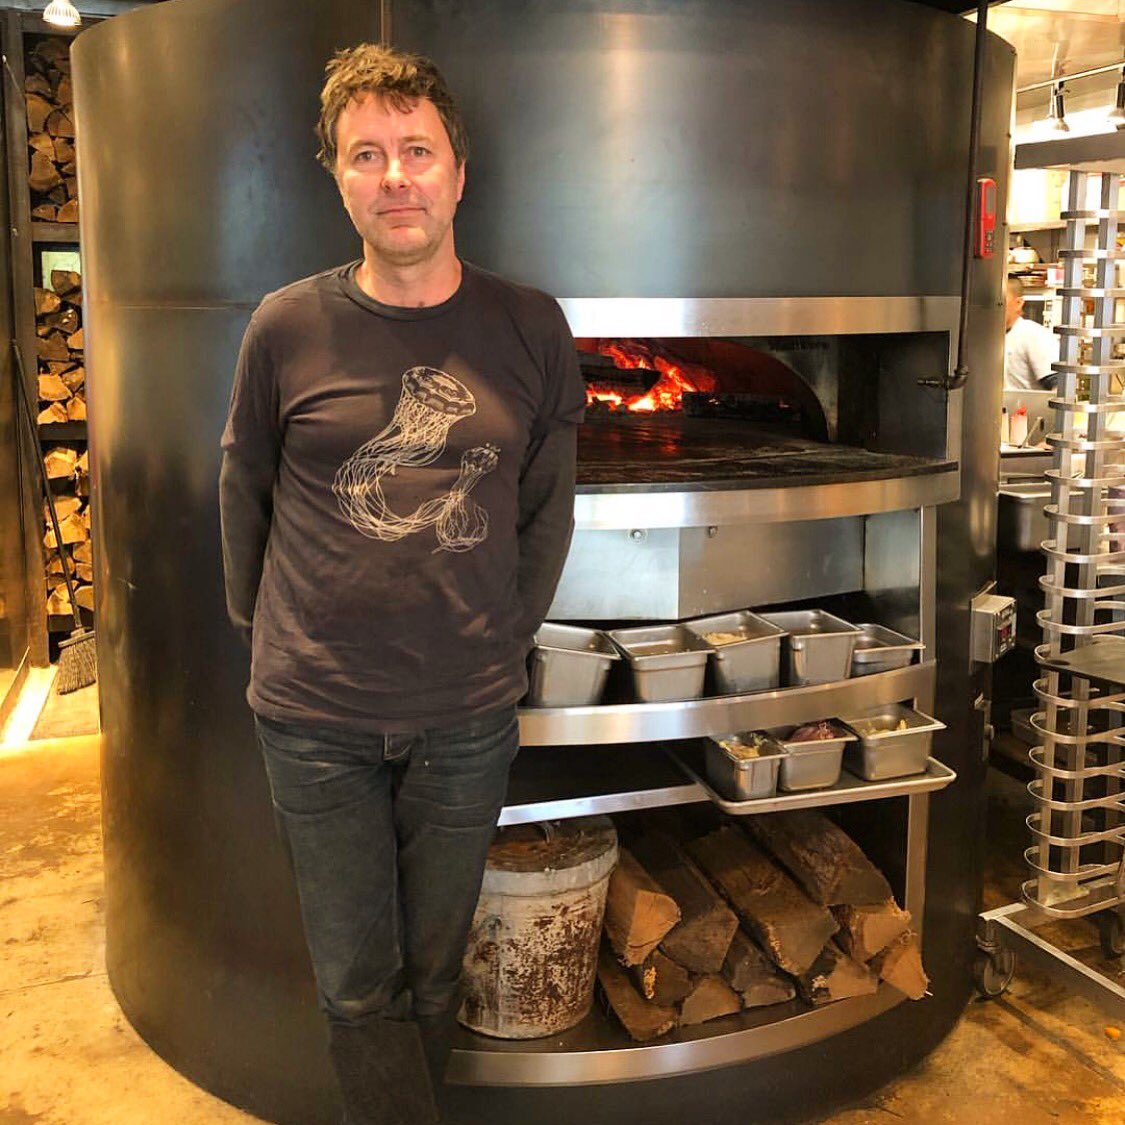 Thank you for supporting us for over 6 years! & now at @littlerdurham & @DurhamJacktar, too! 

We keep our 🔥burning everyday for YOU 

#shopsmallsaturday #shopsmall #chefowned #independentlyowned #pizzeria #durhameats #welovedurham